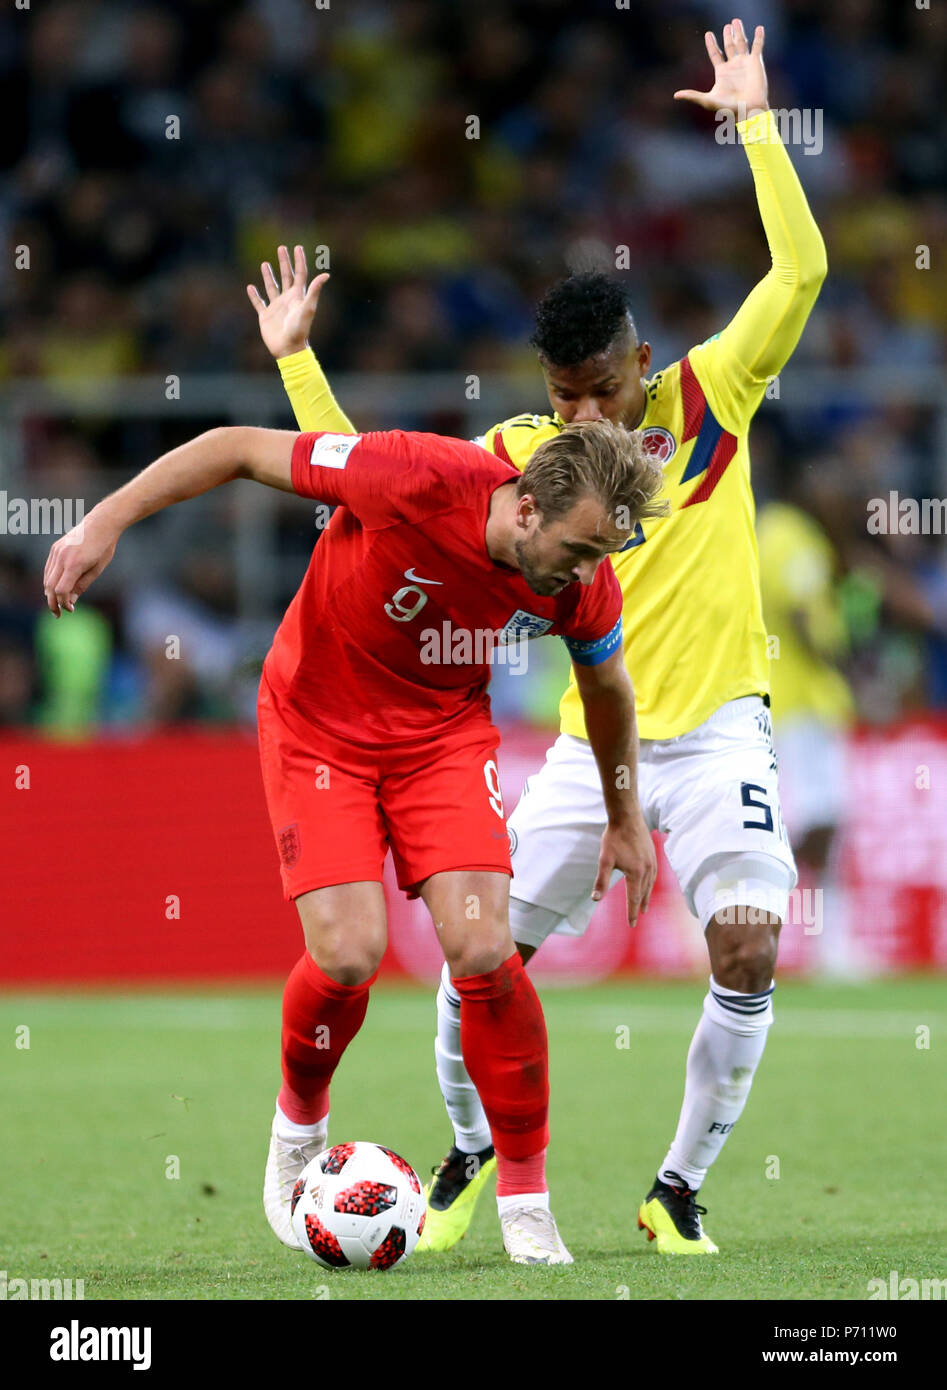 England's Harry Kane (front) and Colombia's Wilmar Barrios battle for the ball during the FIFA World Cup 2018, round of 16 match at the Spartak Stadium, Moscow. Stock Photo